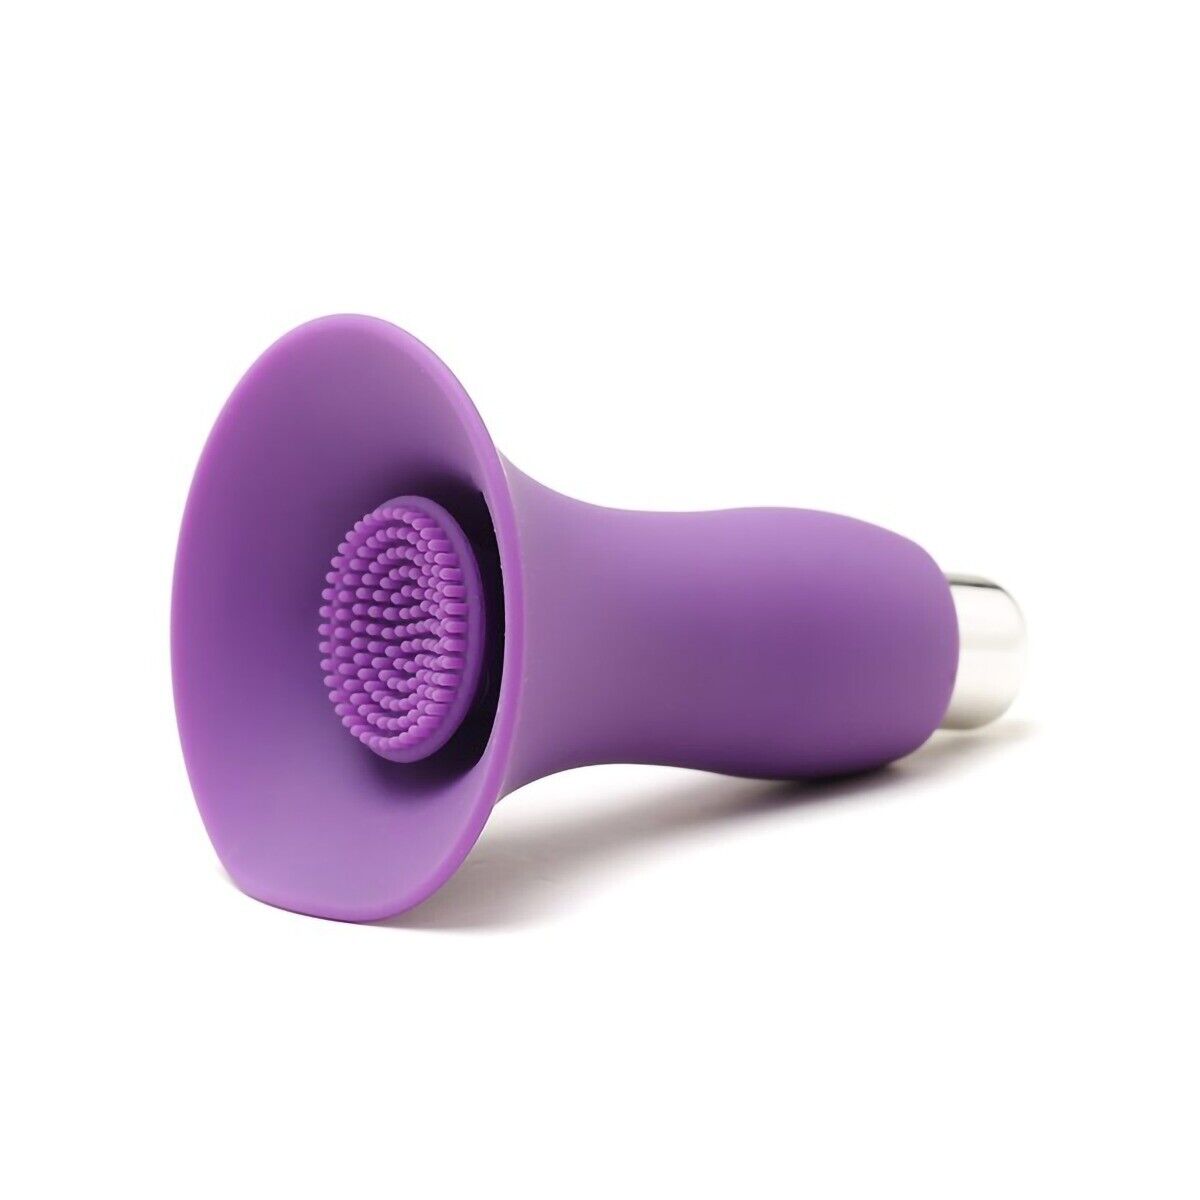 Silicone Breast Nipple Pussy Clit Vibrator Vibe Foreplay Sex-toys for Couples